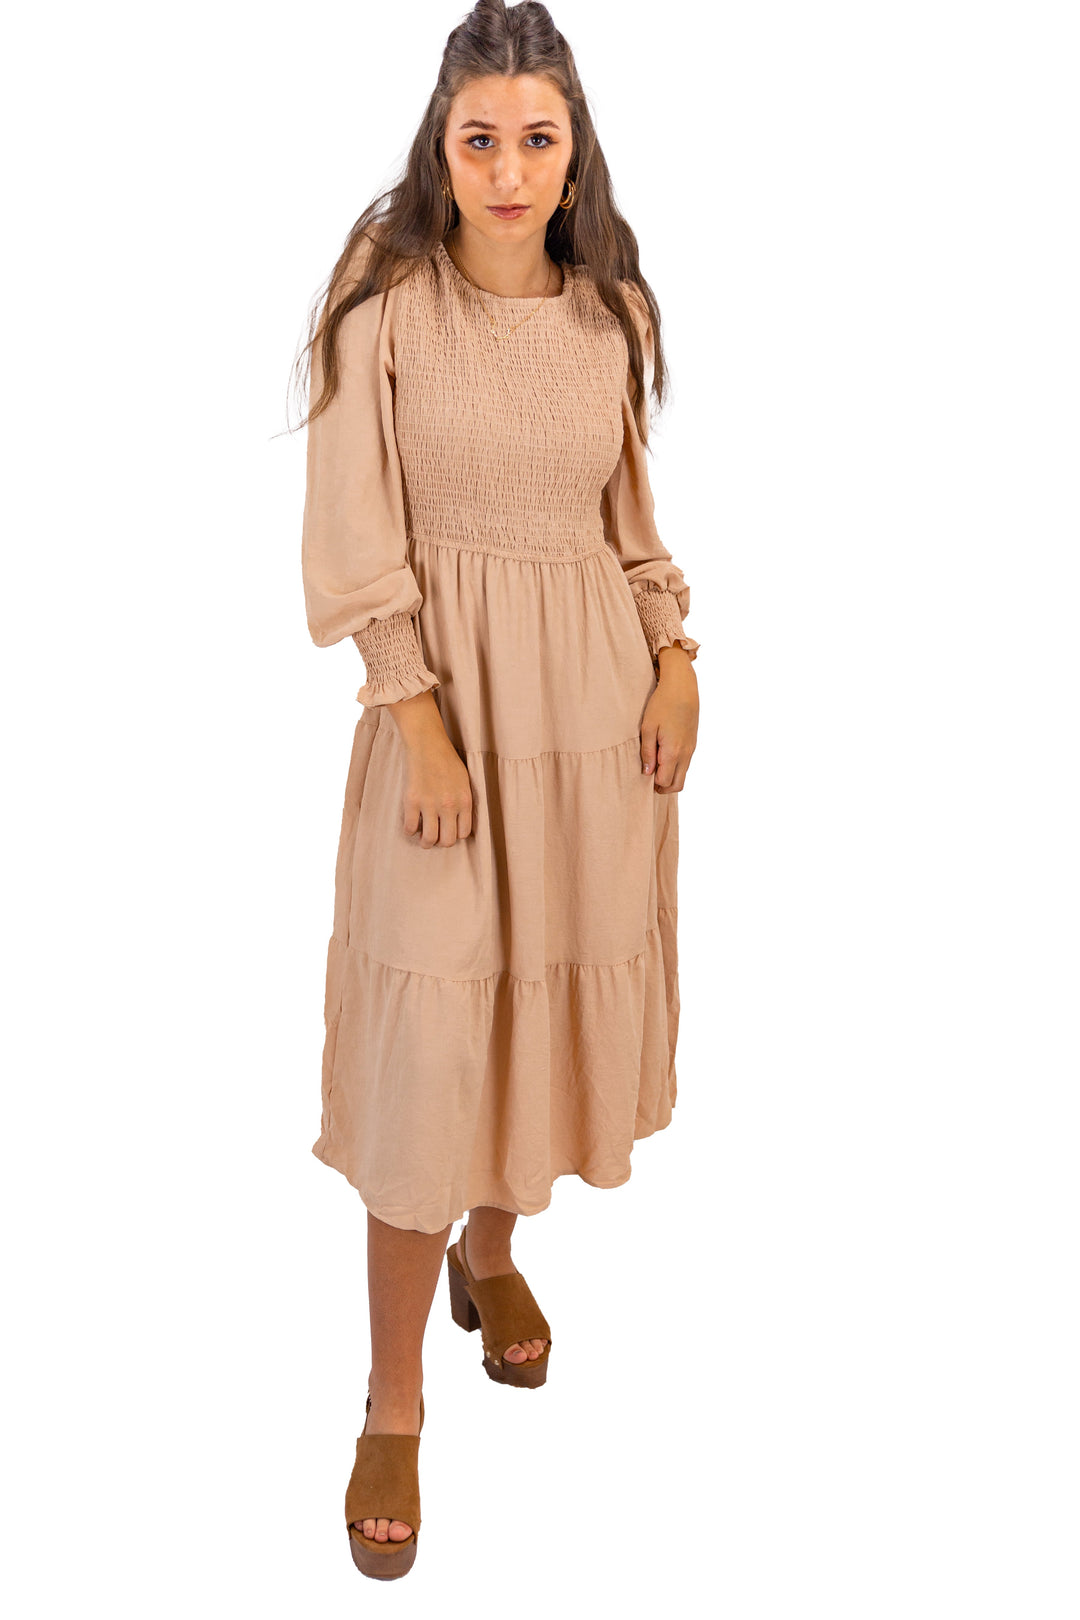 Fabonics Brown Serenity Round Neck Midi Dress with Full Sleeves and Layered Skirt